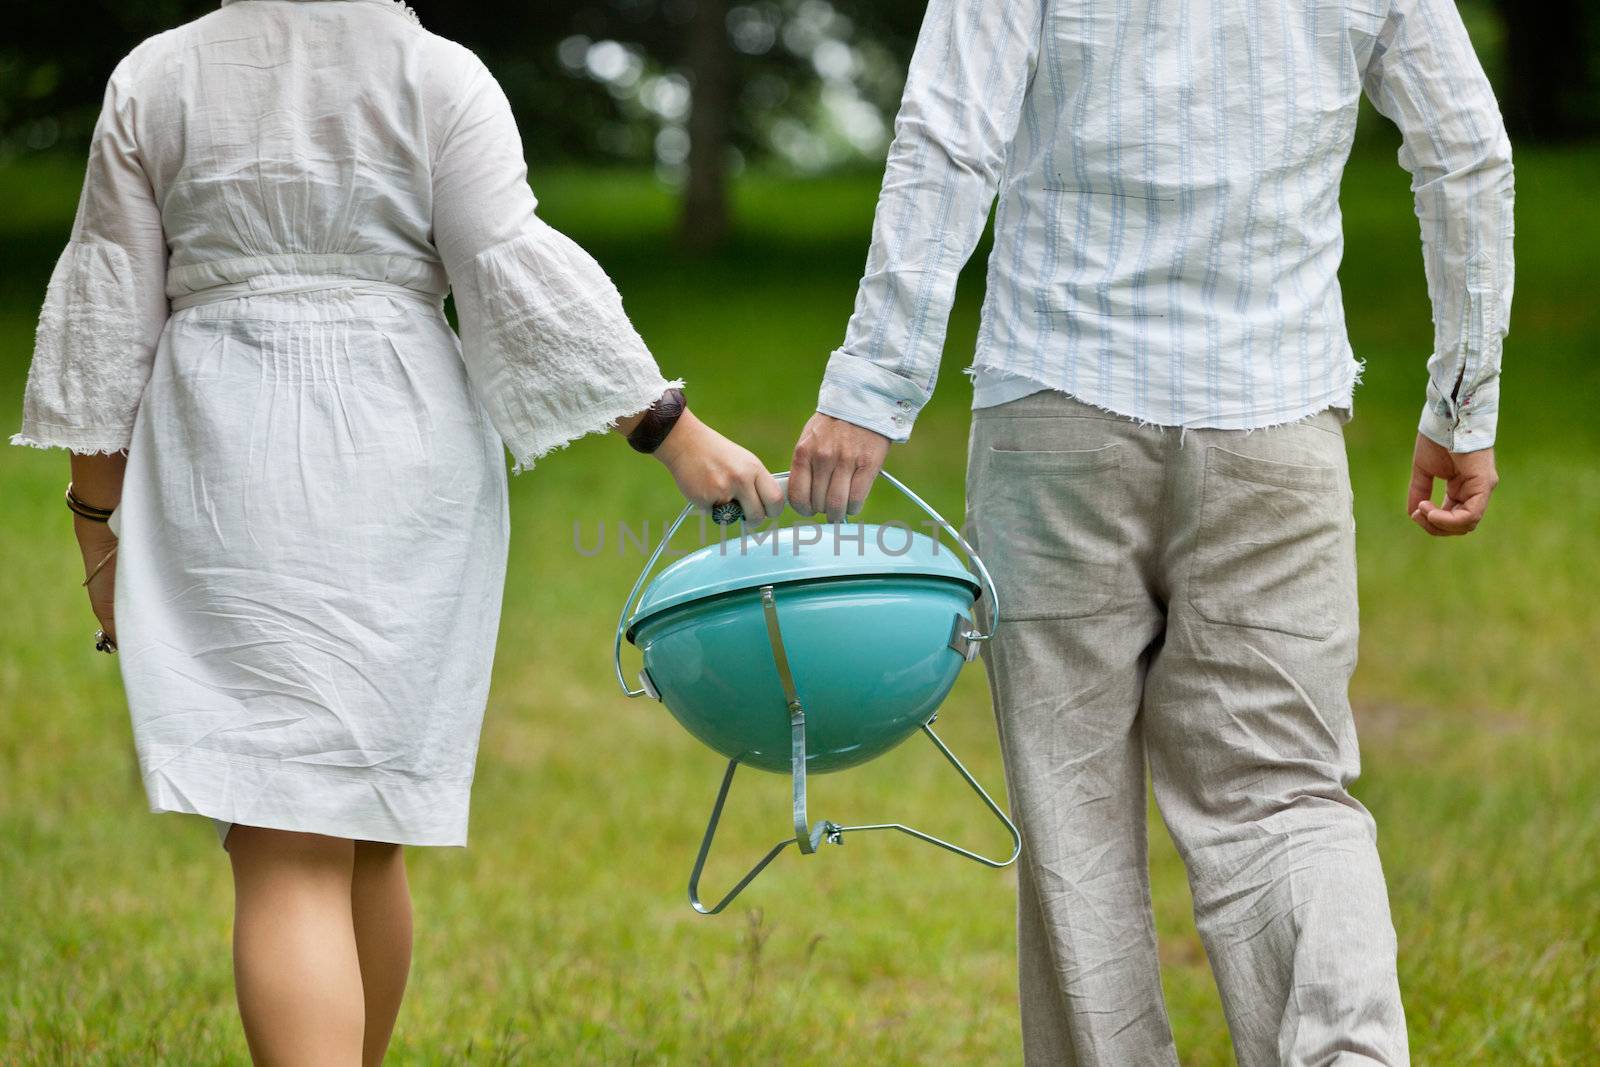 Couple Walking With Portable Barbeque by leaf